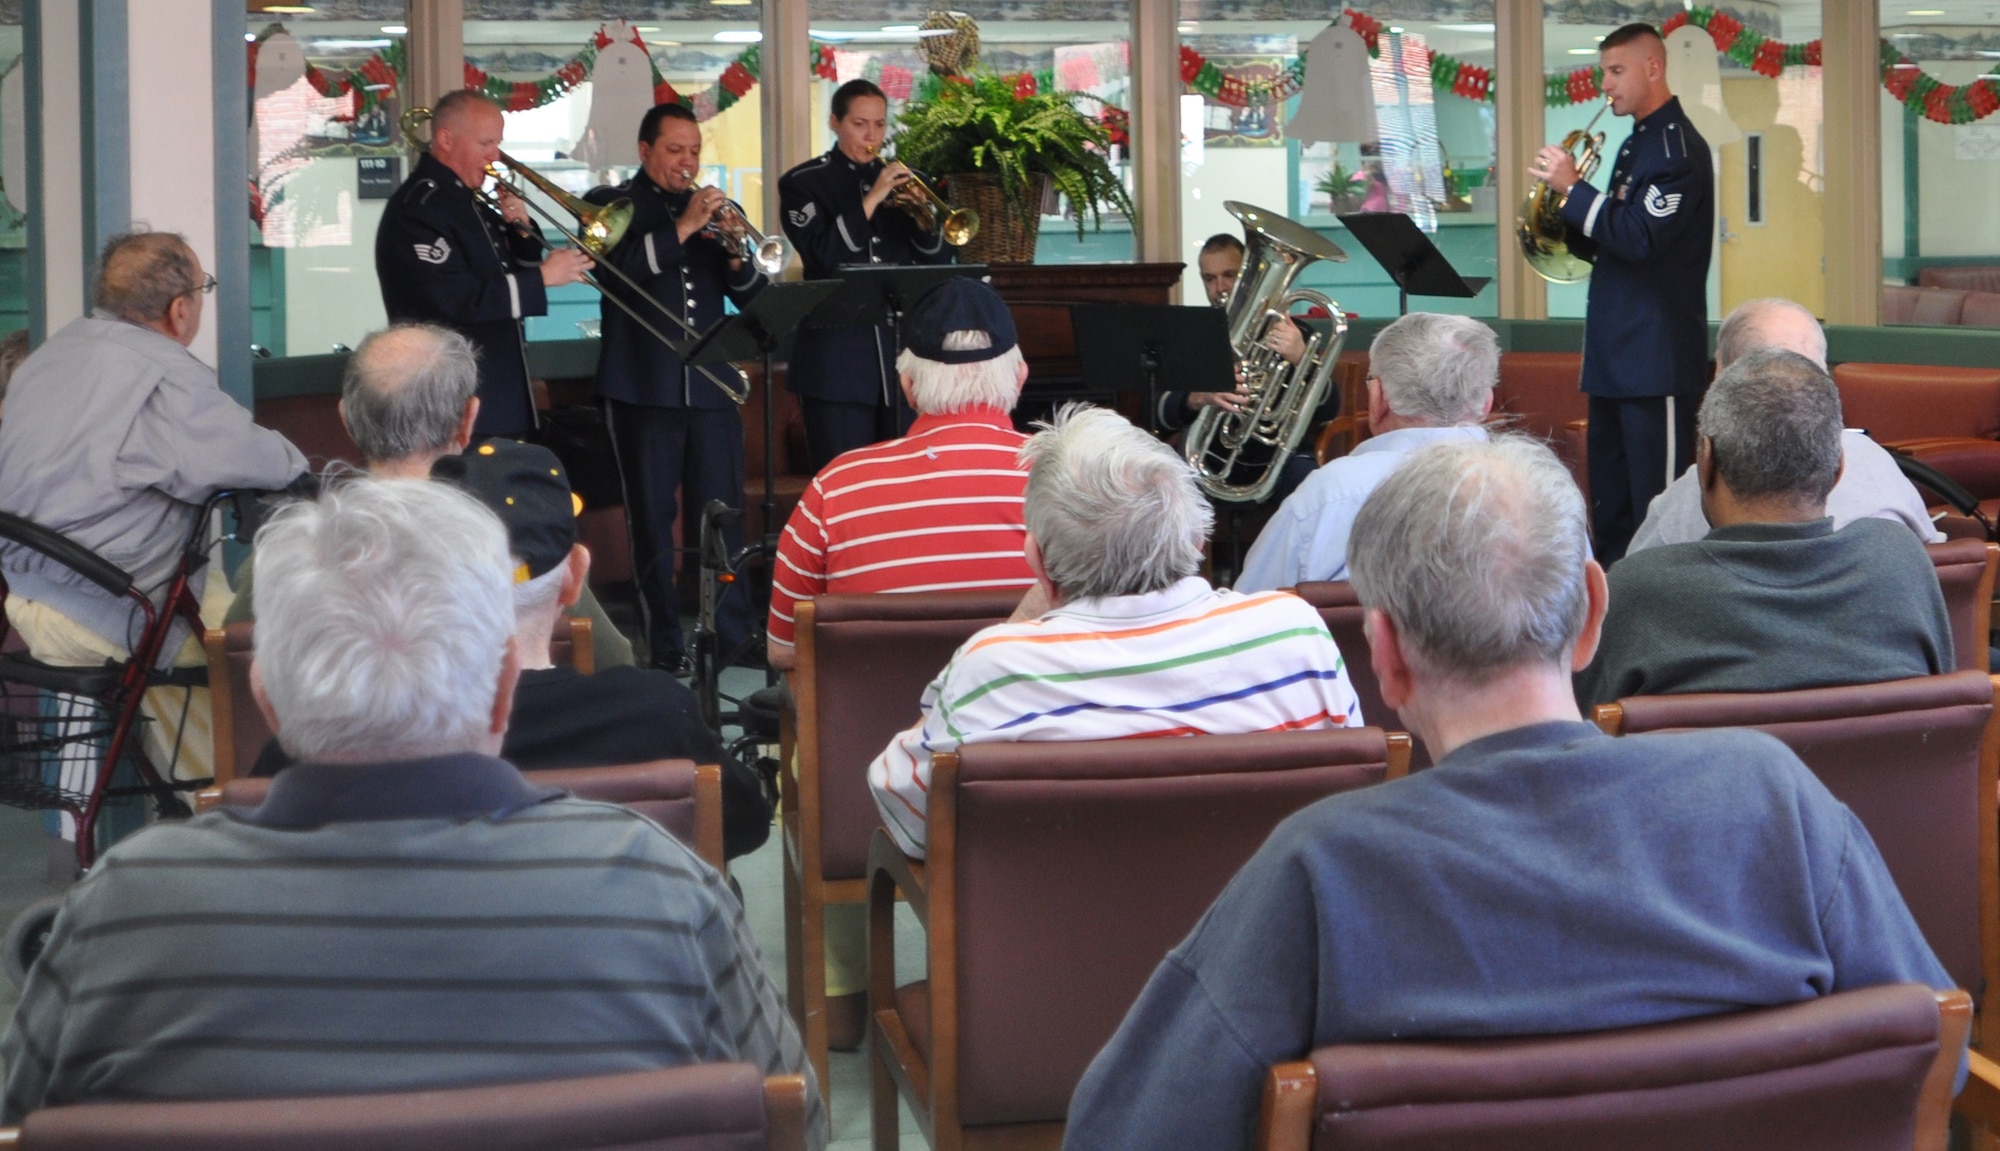 The Band of the U.S. Air Force Reserve's Brass Quintet brought holiday cheer to veterans at the Carl Vinson Veterans Administration Medical Center in Dublin, Dec. 13, 2010. The Reserve Brass ensemble performed four mini-concerts of holiday carols and sing-alongs. This visit is just a small way of saying thanks to veterans for all they have done for our country, said Master Sgt. Mike Andrew, trumpet player and non-commissioned officer-in-charge of the Brass Quintet. The Brass Quintet is the most versatile, small ensemble of the Band of the U.S. Air Force Reserve.  The quintet performs a variety of different community relations concerts throughout the southeast.   (U.S. Air Force photo/Candice Allen)
